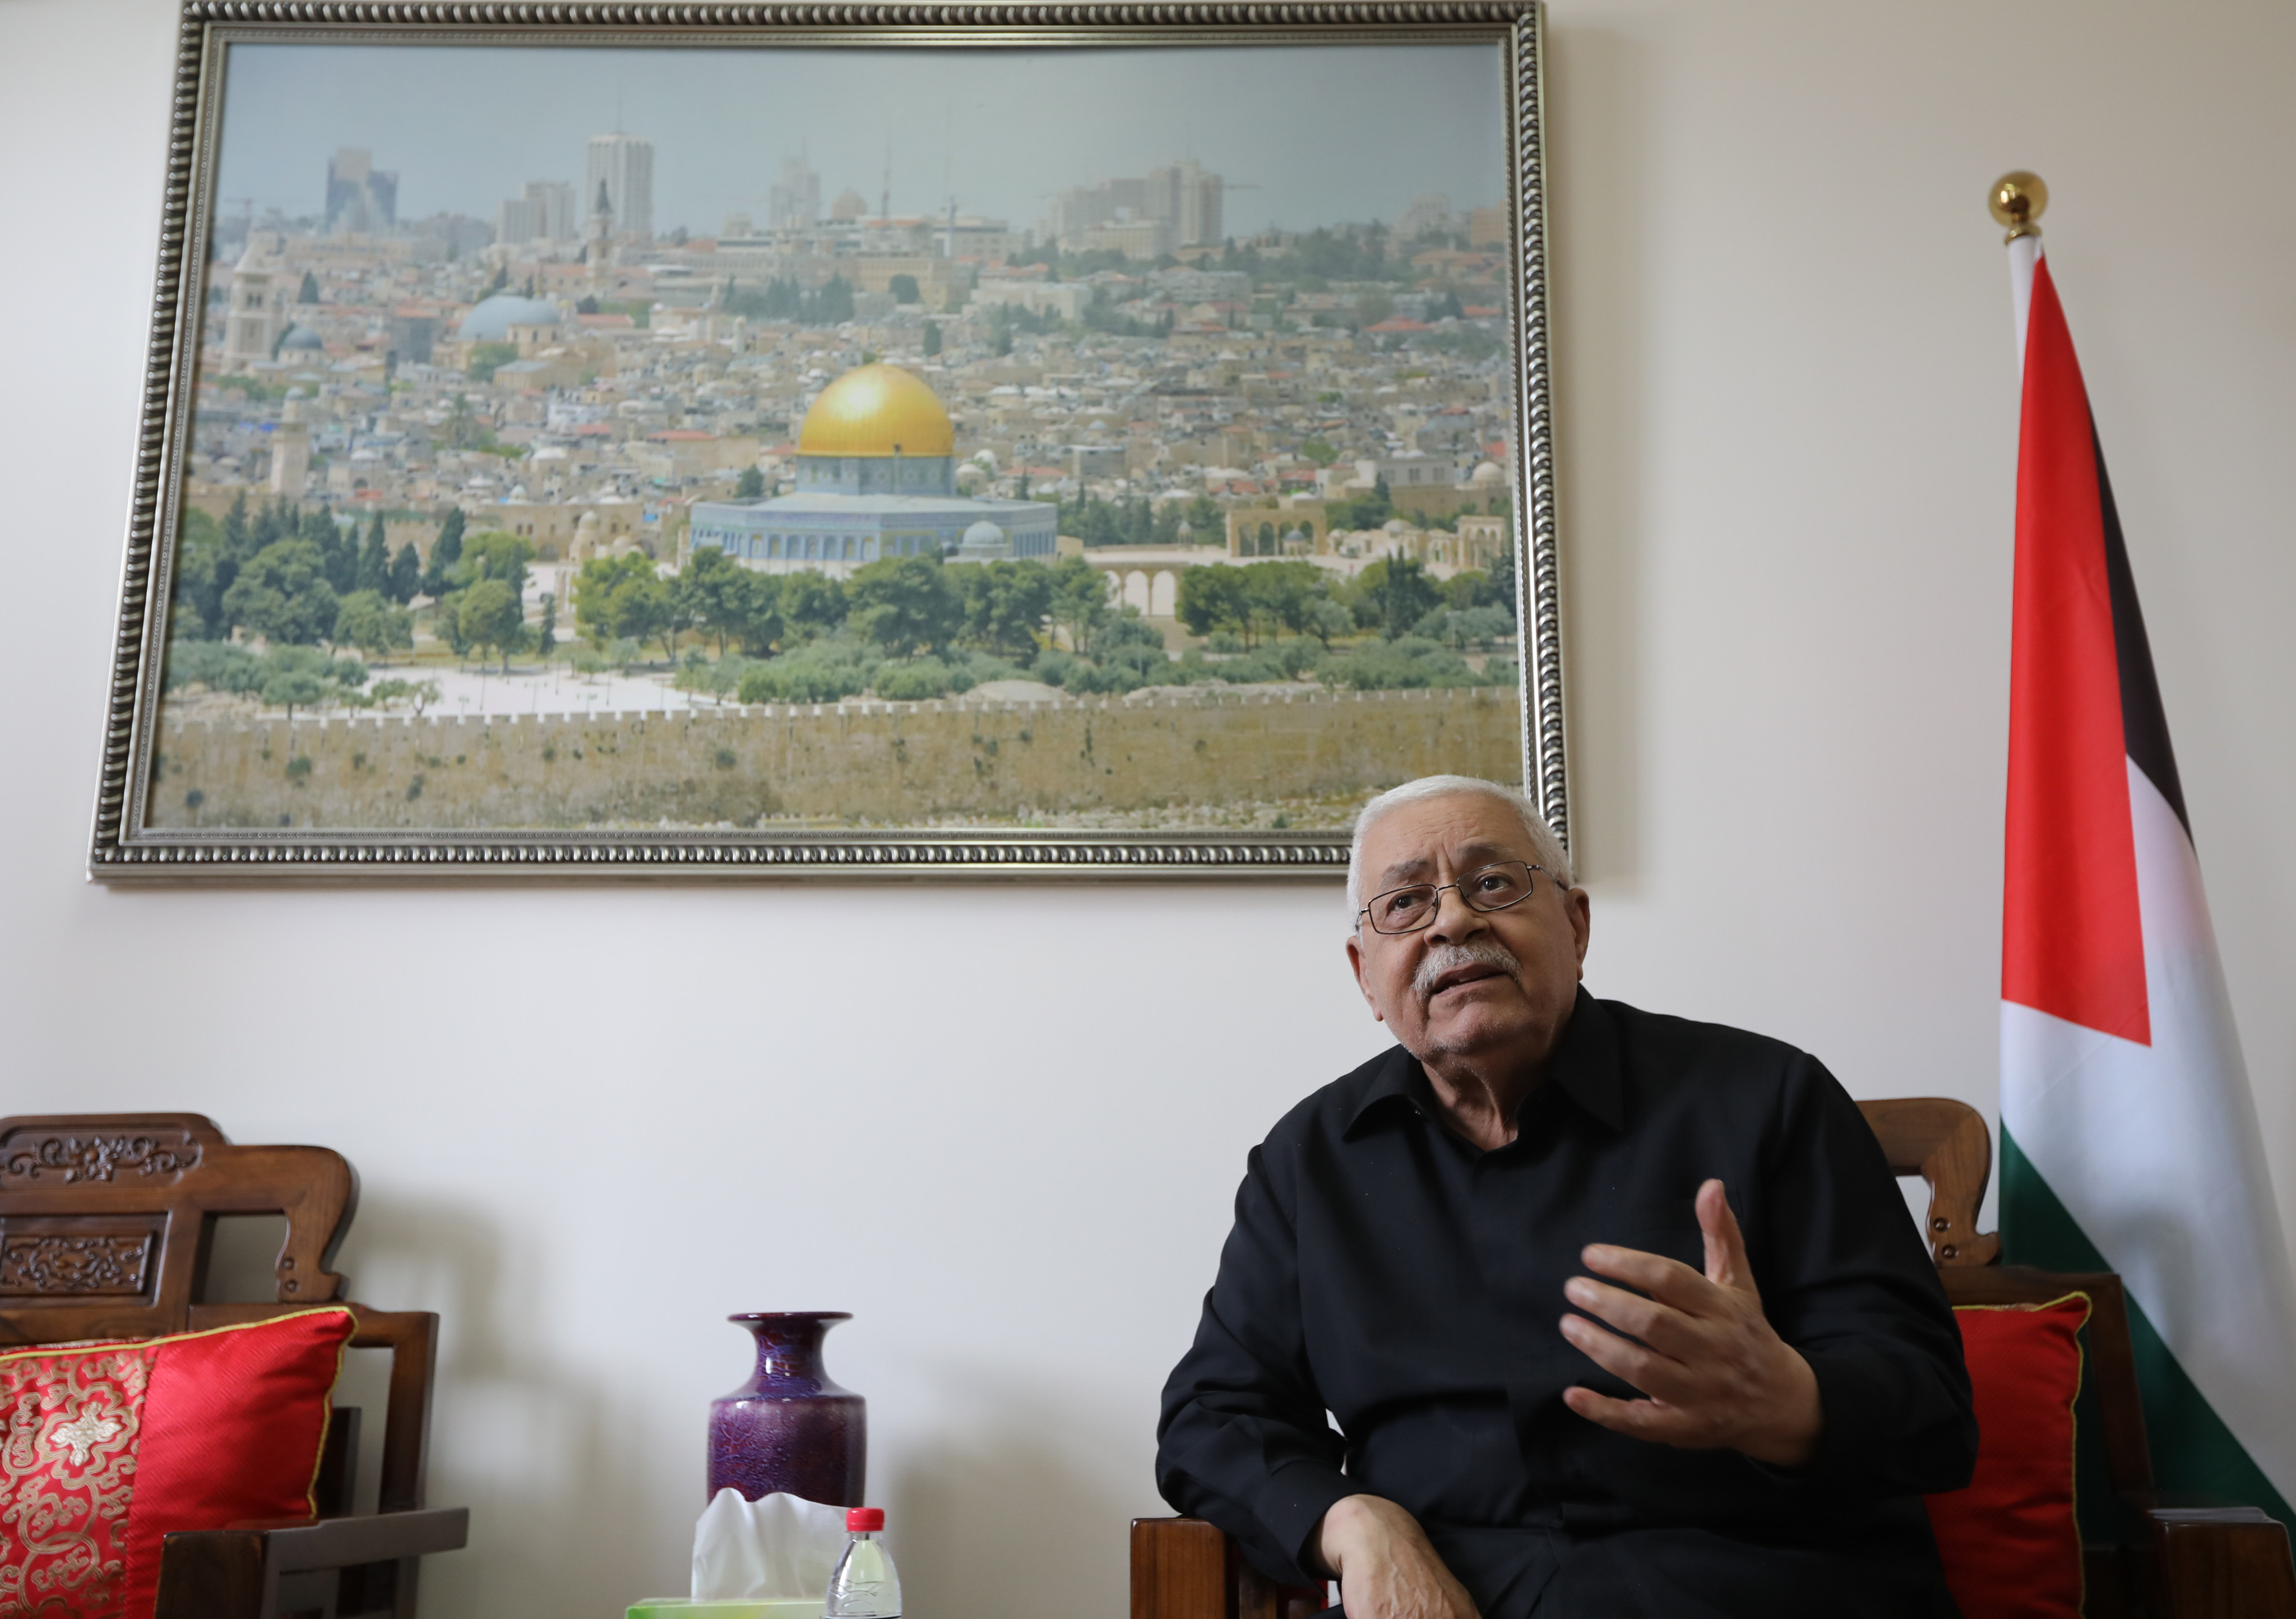 Palestinian ambassador Fariz Mehdawi urged Beijing and Washington to work together instead of vying for influence in the region. Photo: Simon Song